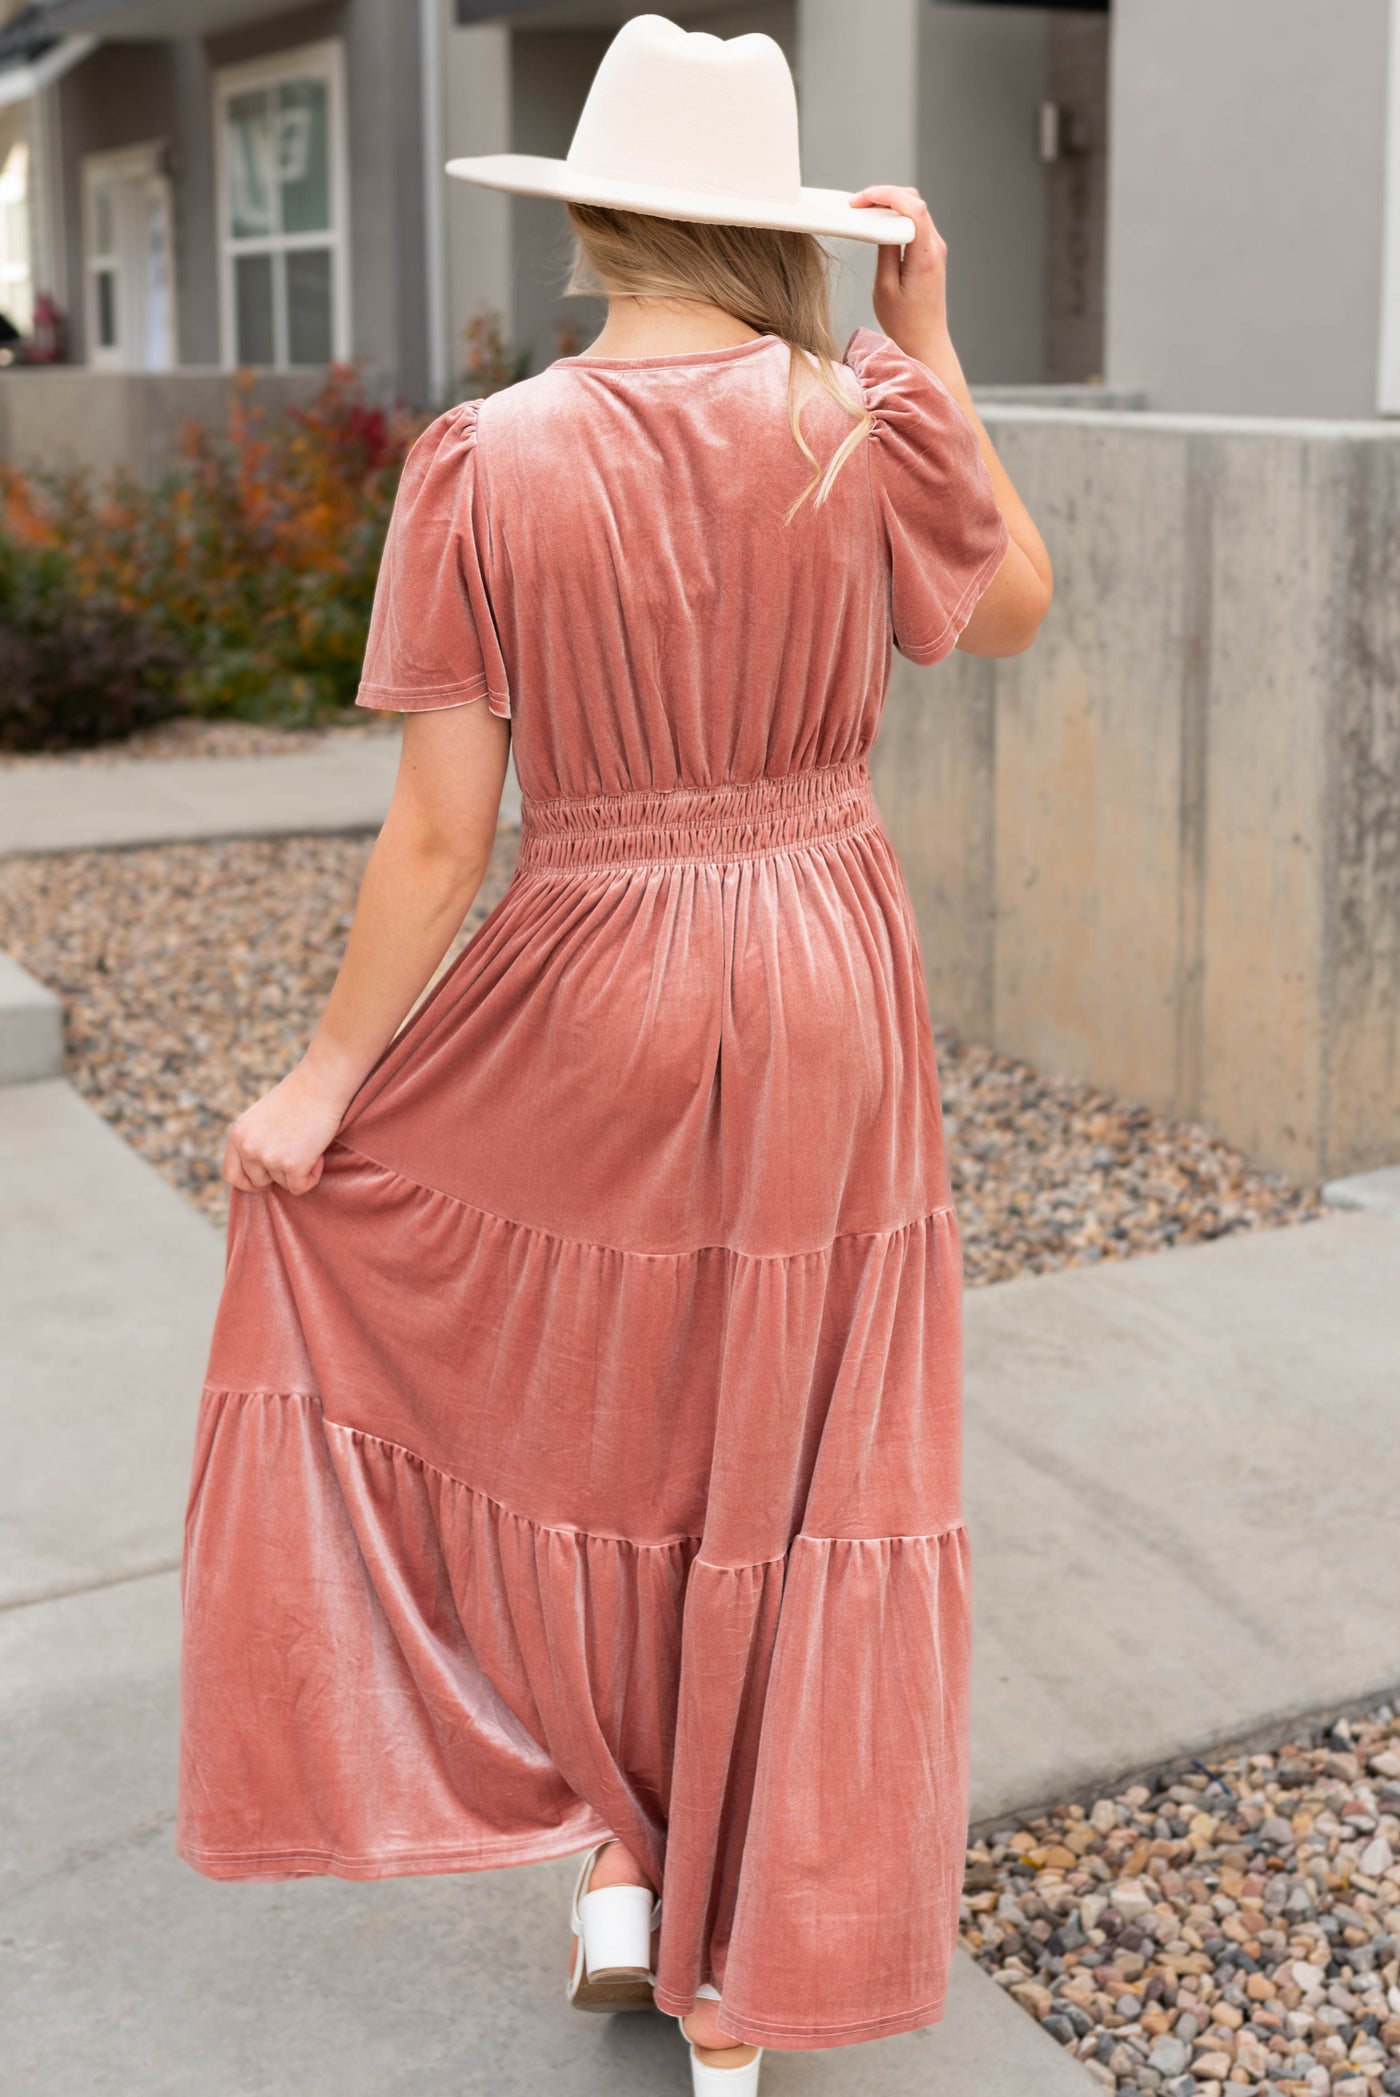 Back view of the blush dress